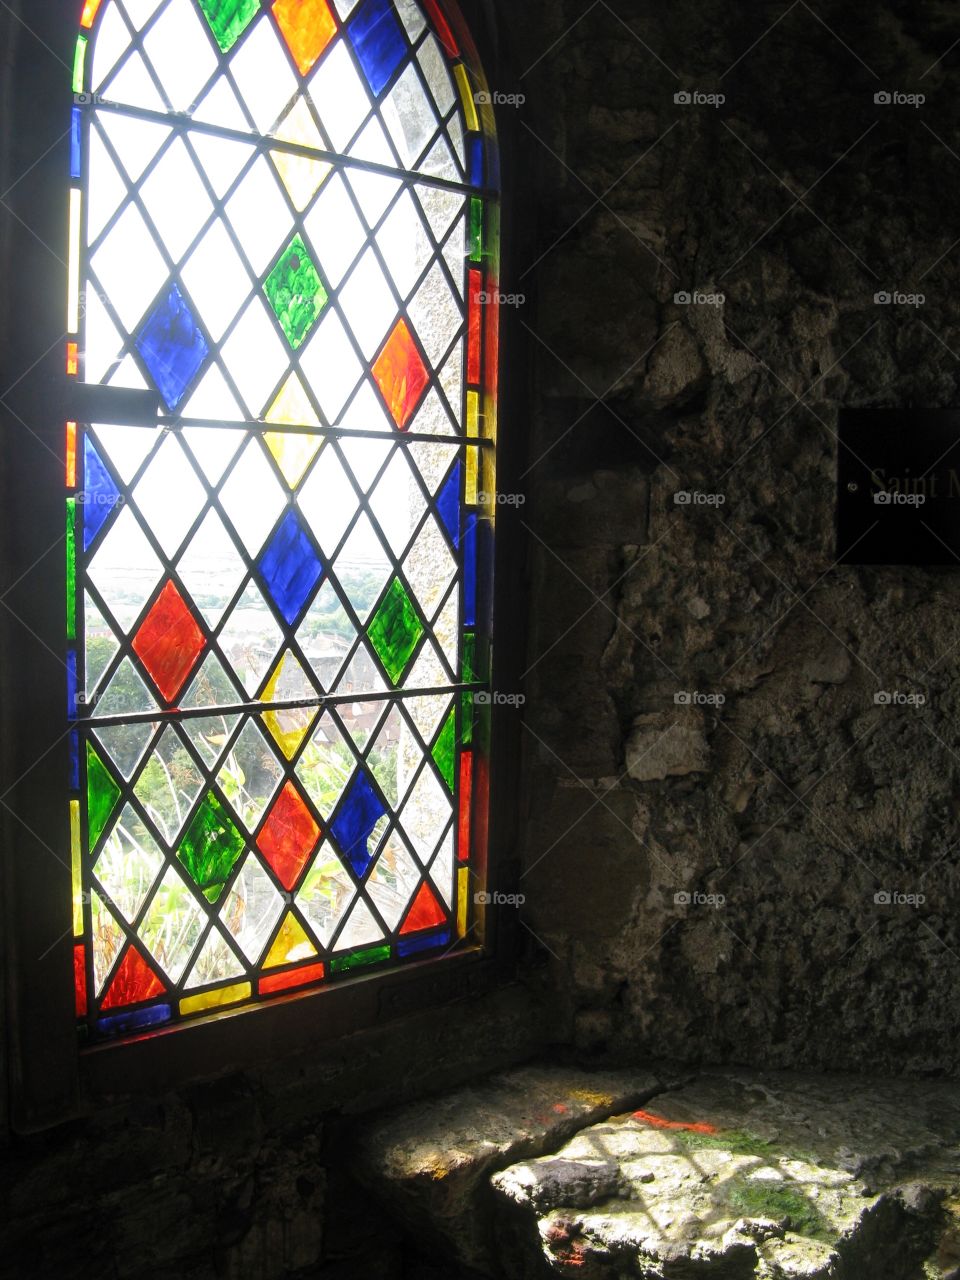 Stained glass window at Arundel Castle 